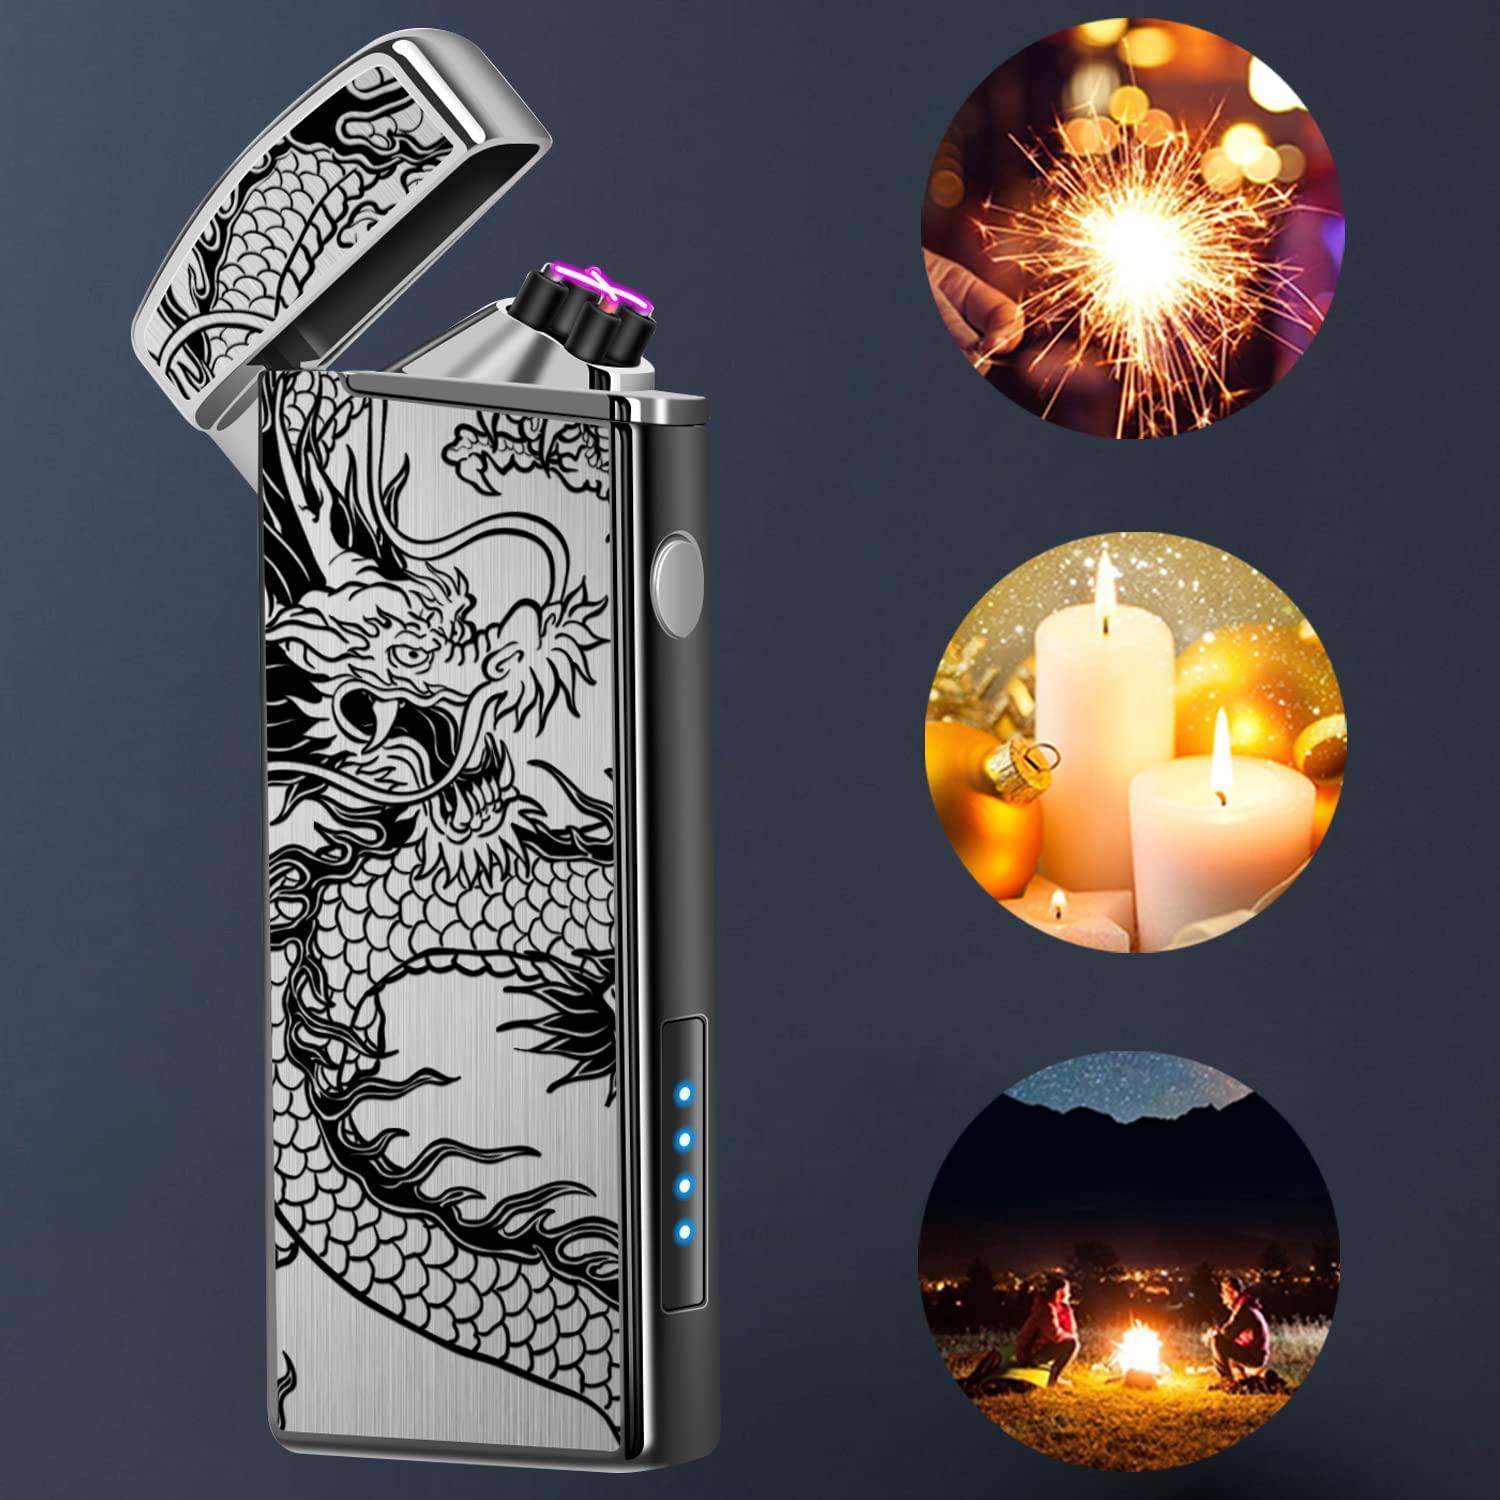 LcFun Rechargeable Lighter Electric Arc Lighter Plasma Lighters Cool Windproof Flameless Lighters with LED Display Power for Incense, Camping (Black